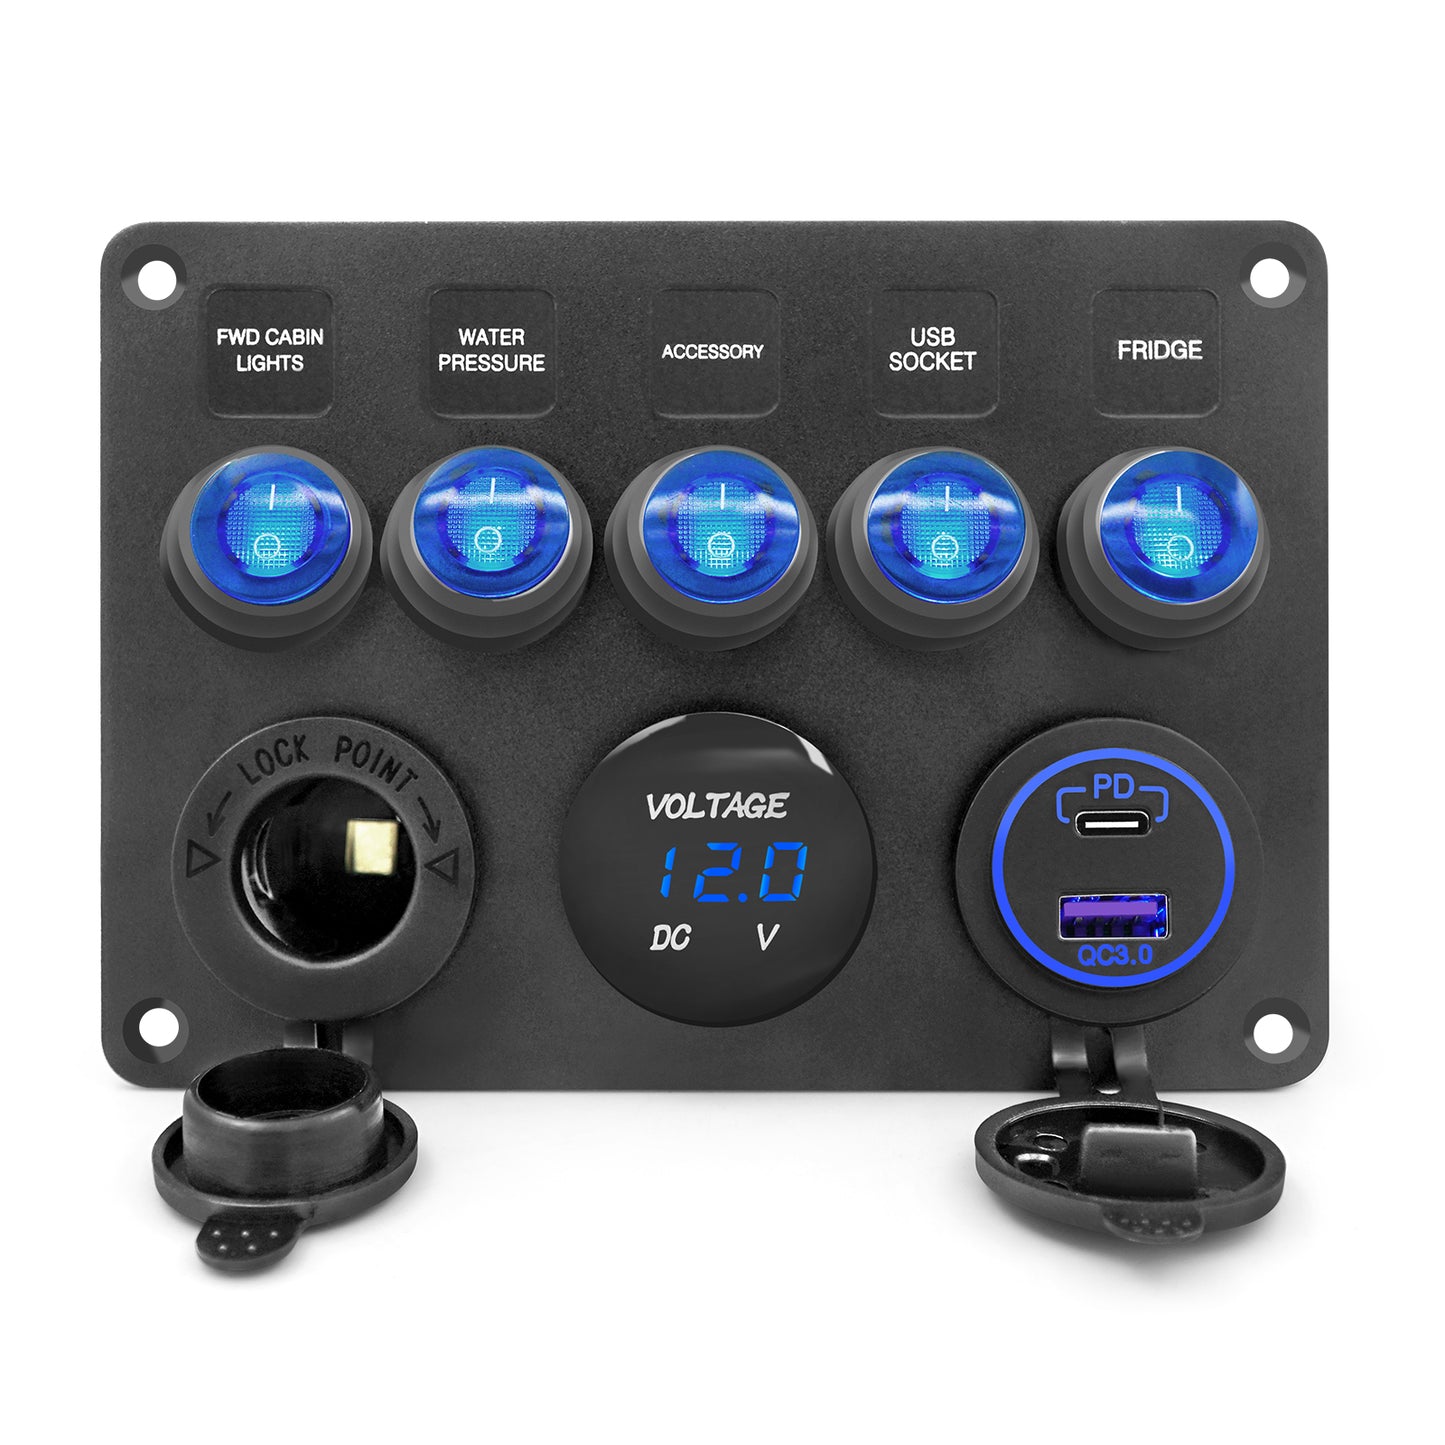 5 Gang Aluminum Rocker Switch Panel Marine Boat Board with Blue Digital Voltage Display + PD Charging Port + QC3.0 USB Port + 12V DC Power Socket with Circuit Breaker for Vehicles Yacht Car Truck RV